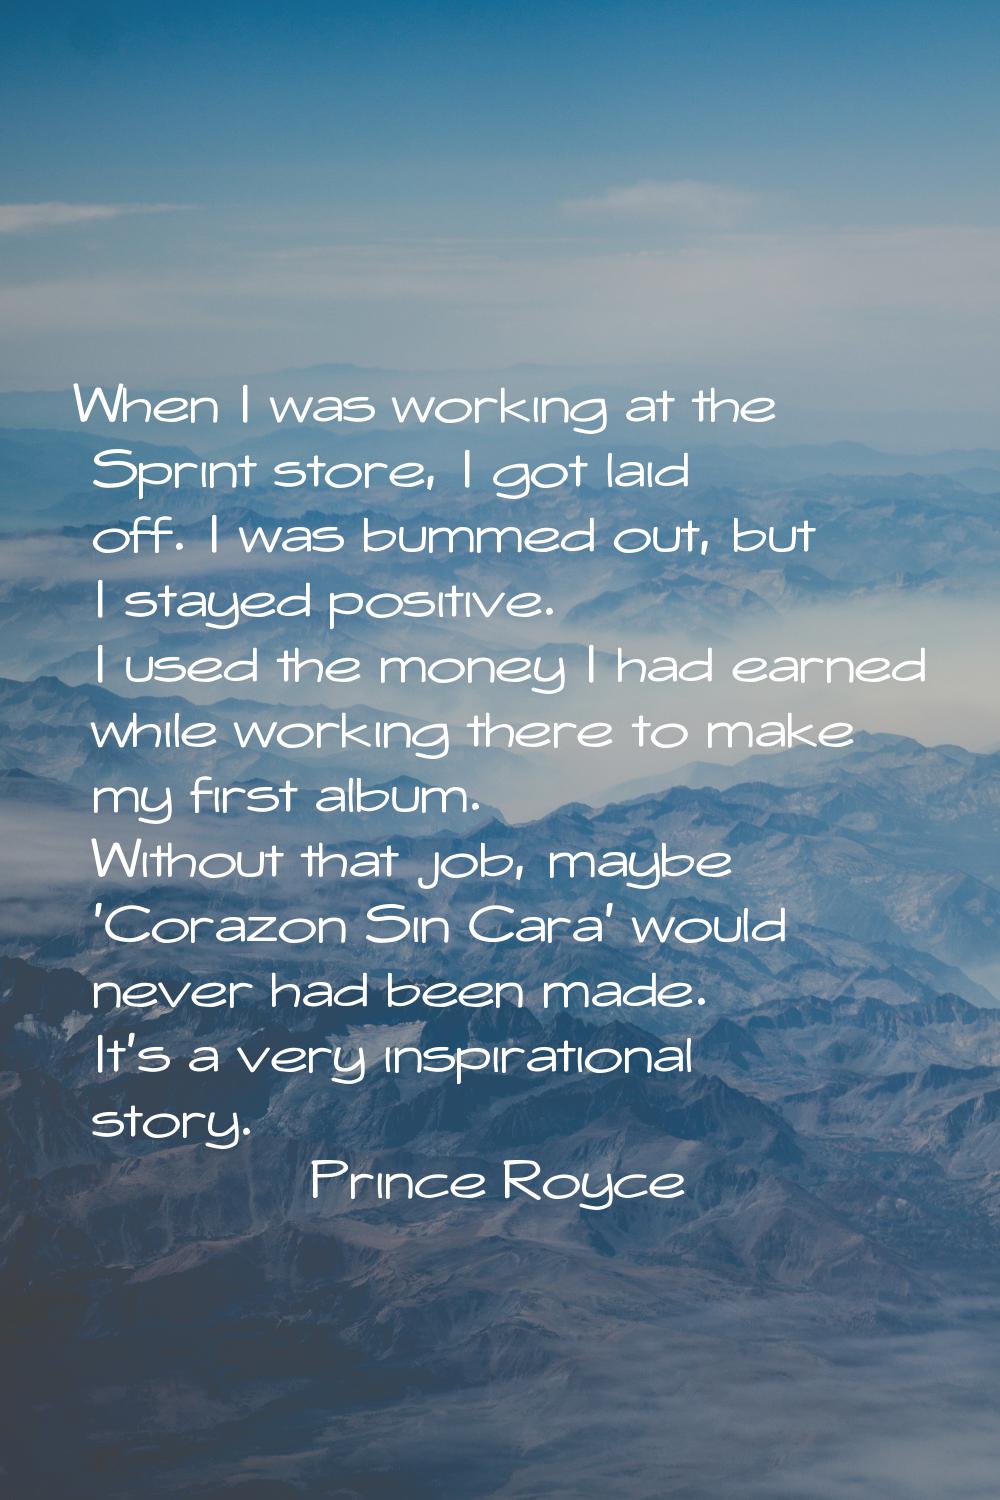 When I was working at the Sprint store, I got laid off. I was bummed out, but I stayed positive. I 